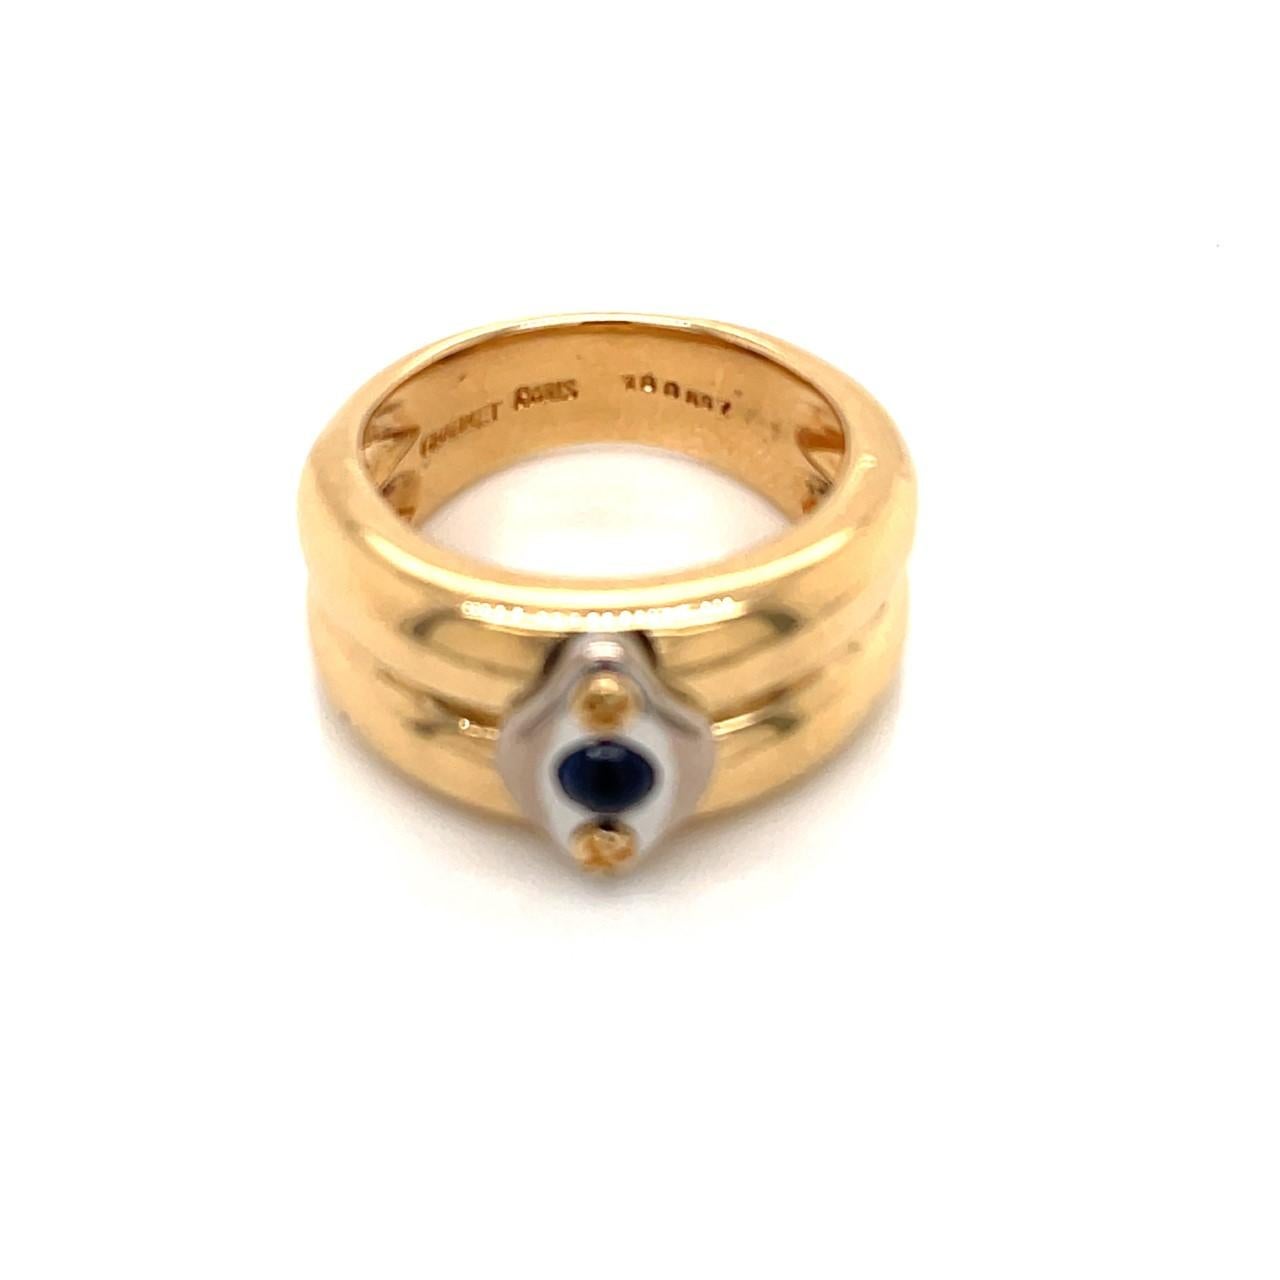 Women's Vintage Chaumet Paris 18k Yellow Gold Ring with Cabochon Sapphire